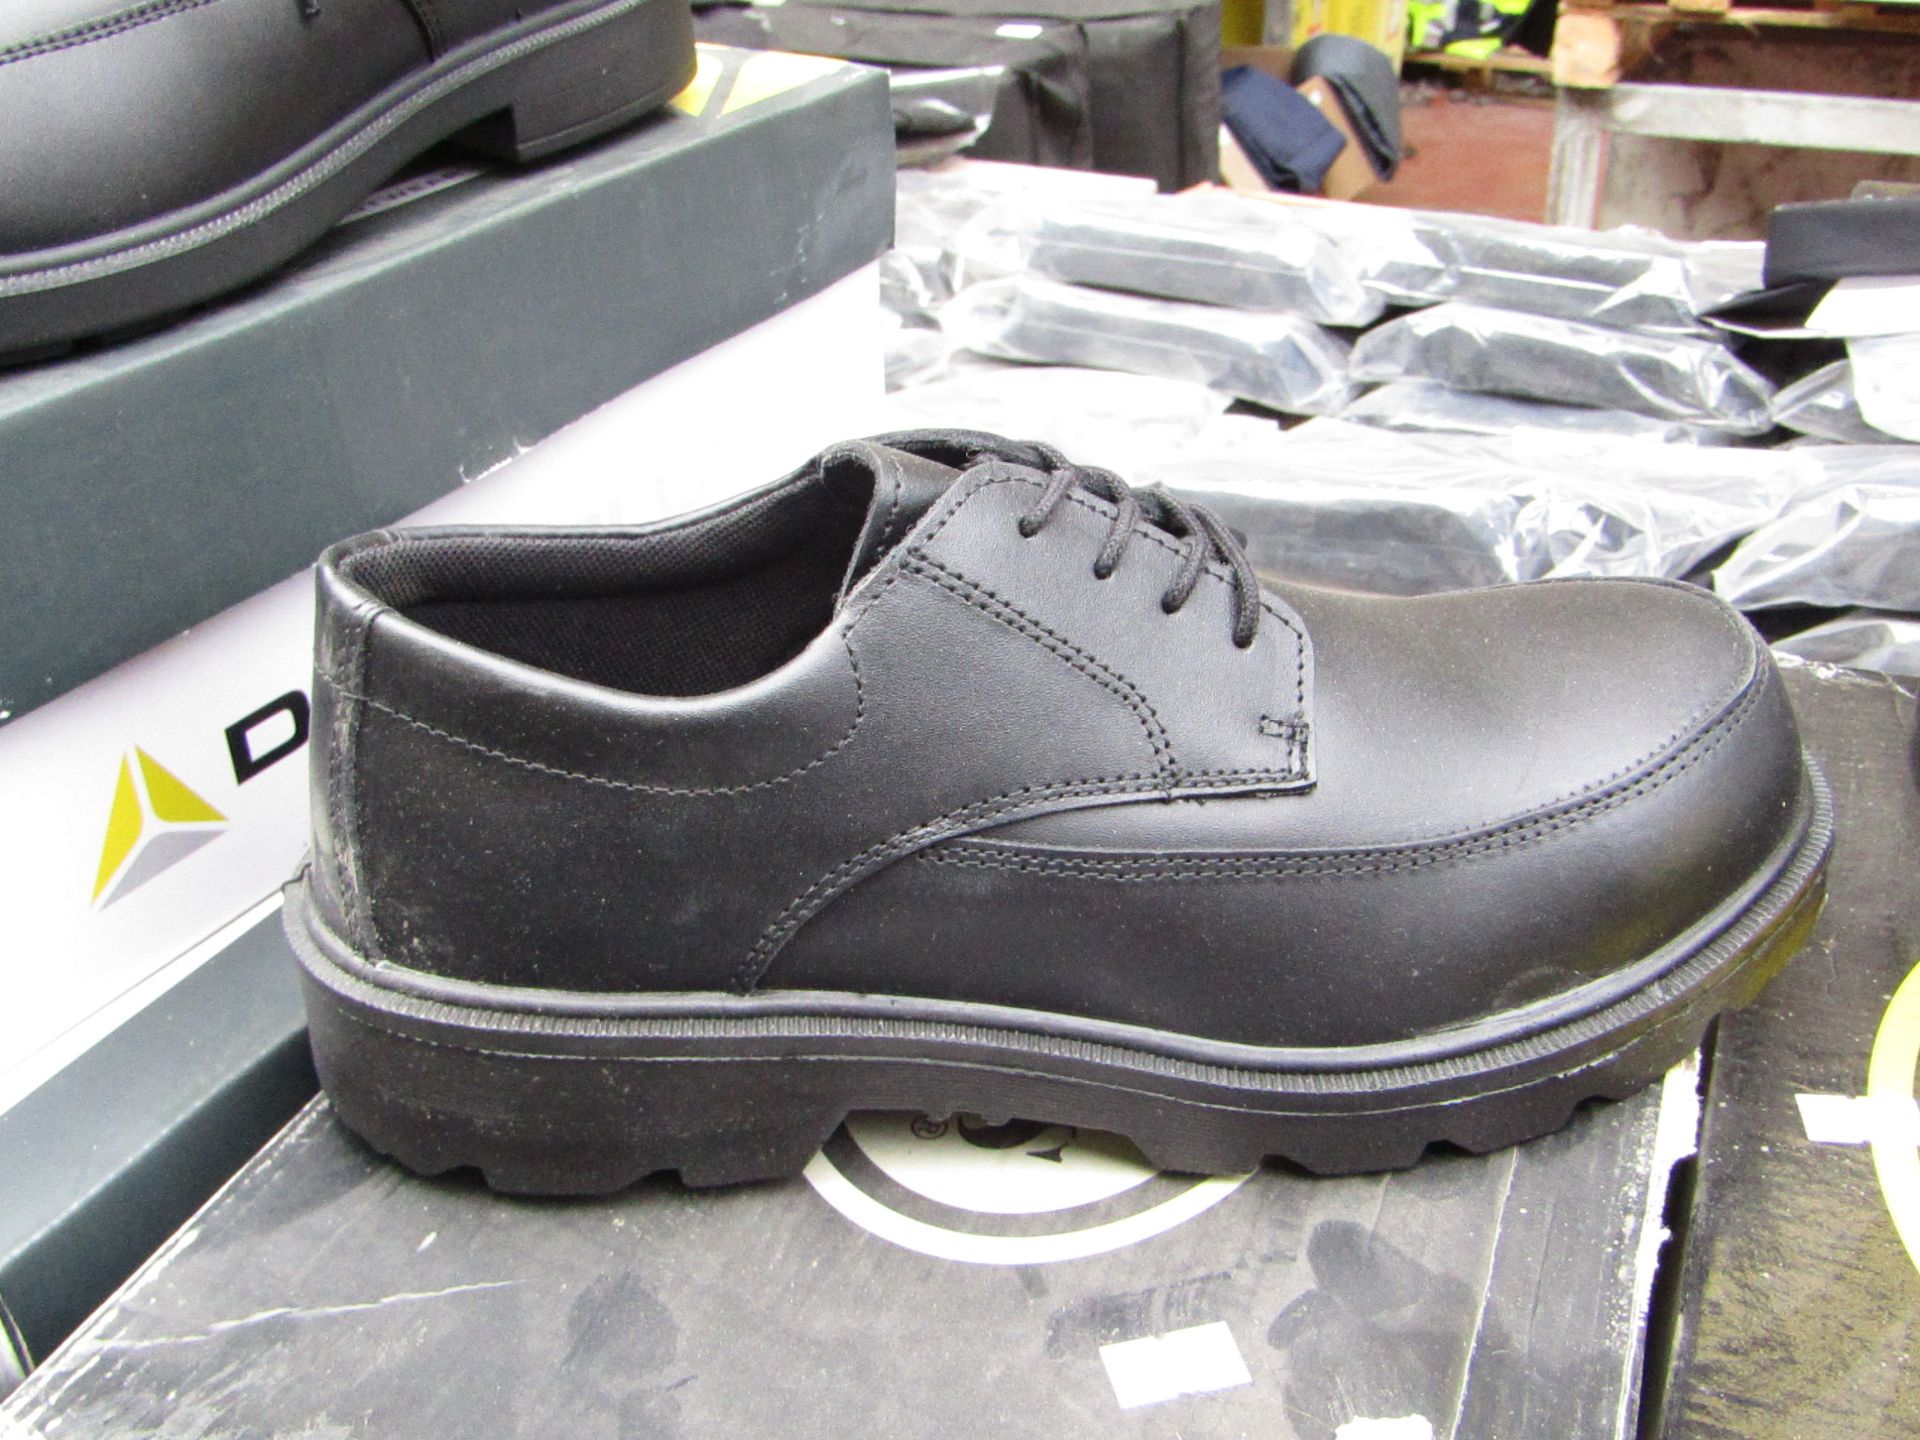 Capps laced steel toe cap oxford shoe, size 7, new and boxed.